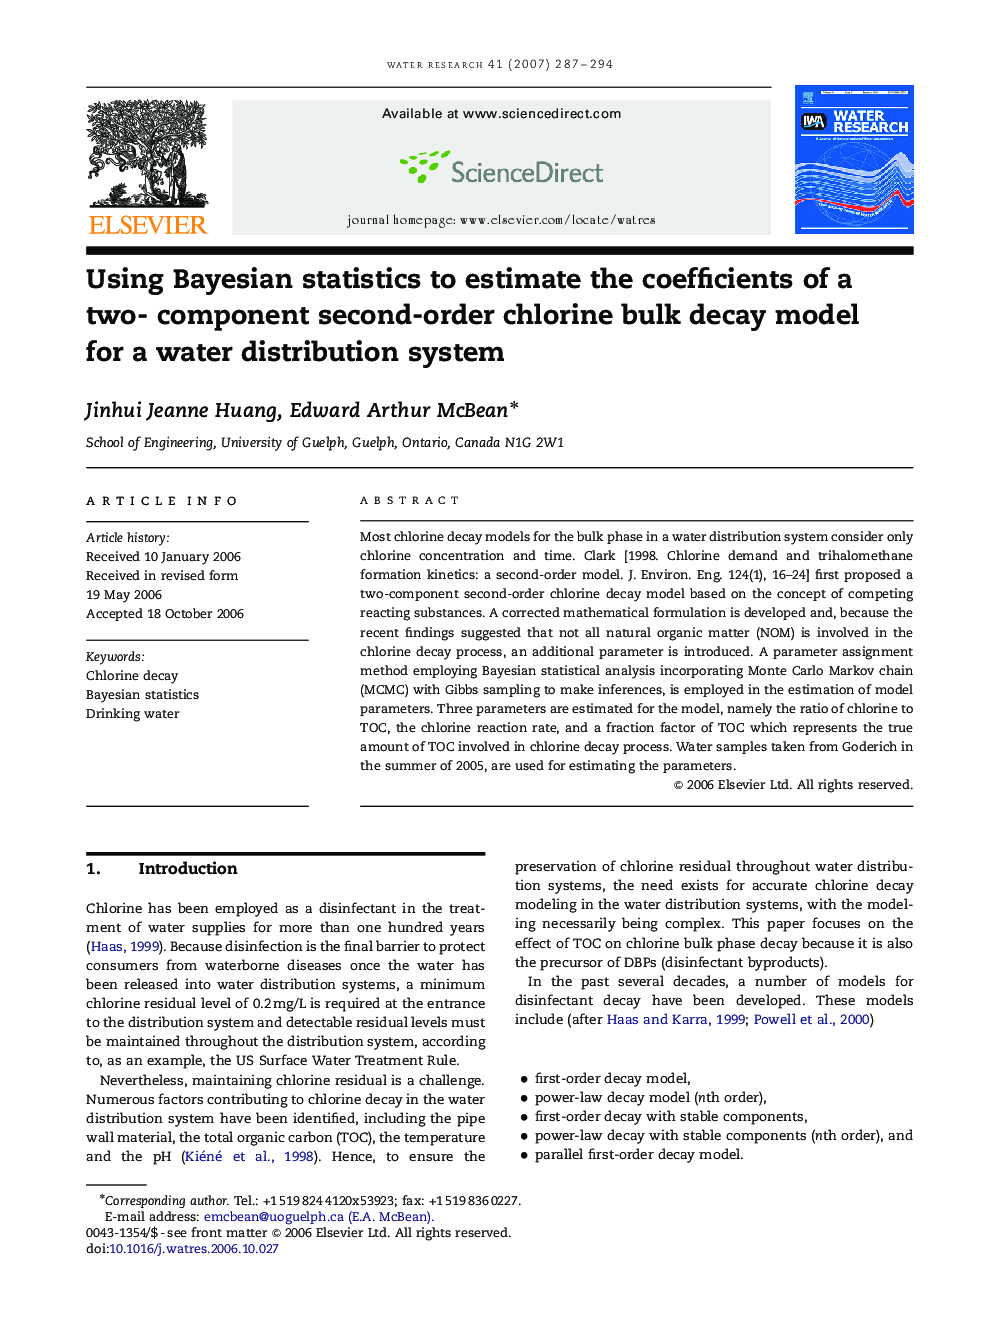 Using Bayesian statistics to estimate the coefficients of a two- component second-order chlorine bulk decay model for a water distribution system